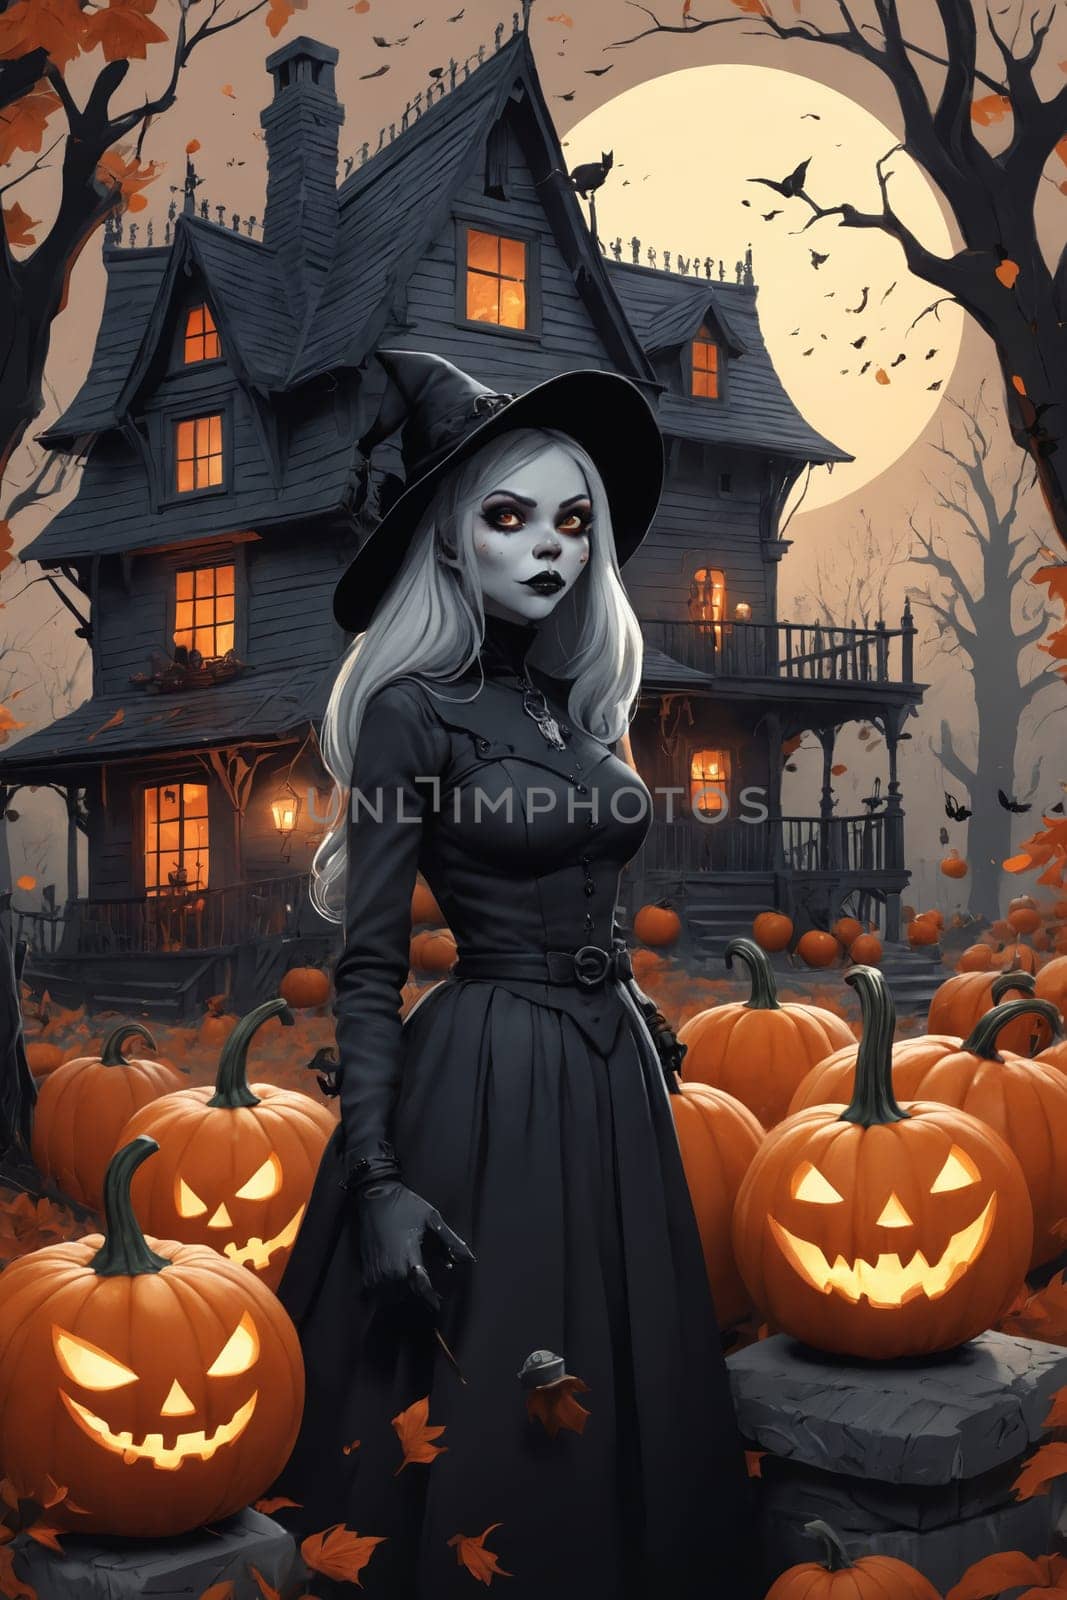 The essence of October: a witch with a broom surrounded by jack-o'-lanterns in front of a spooky, orange-lit haunted house.